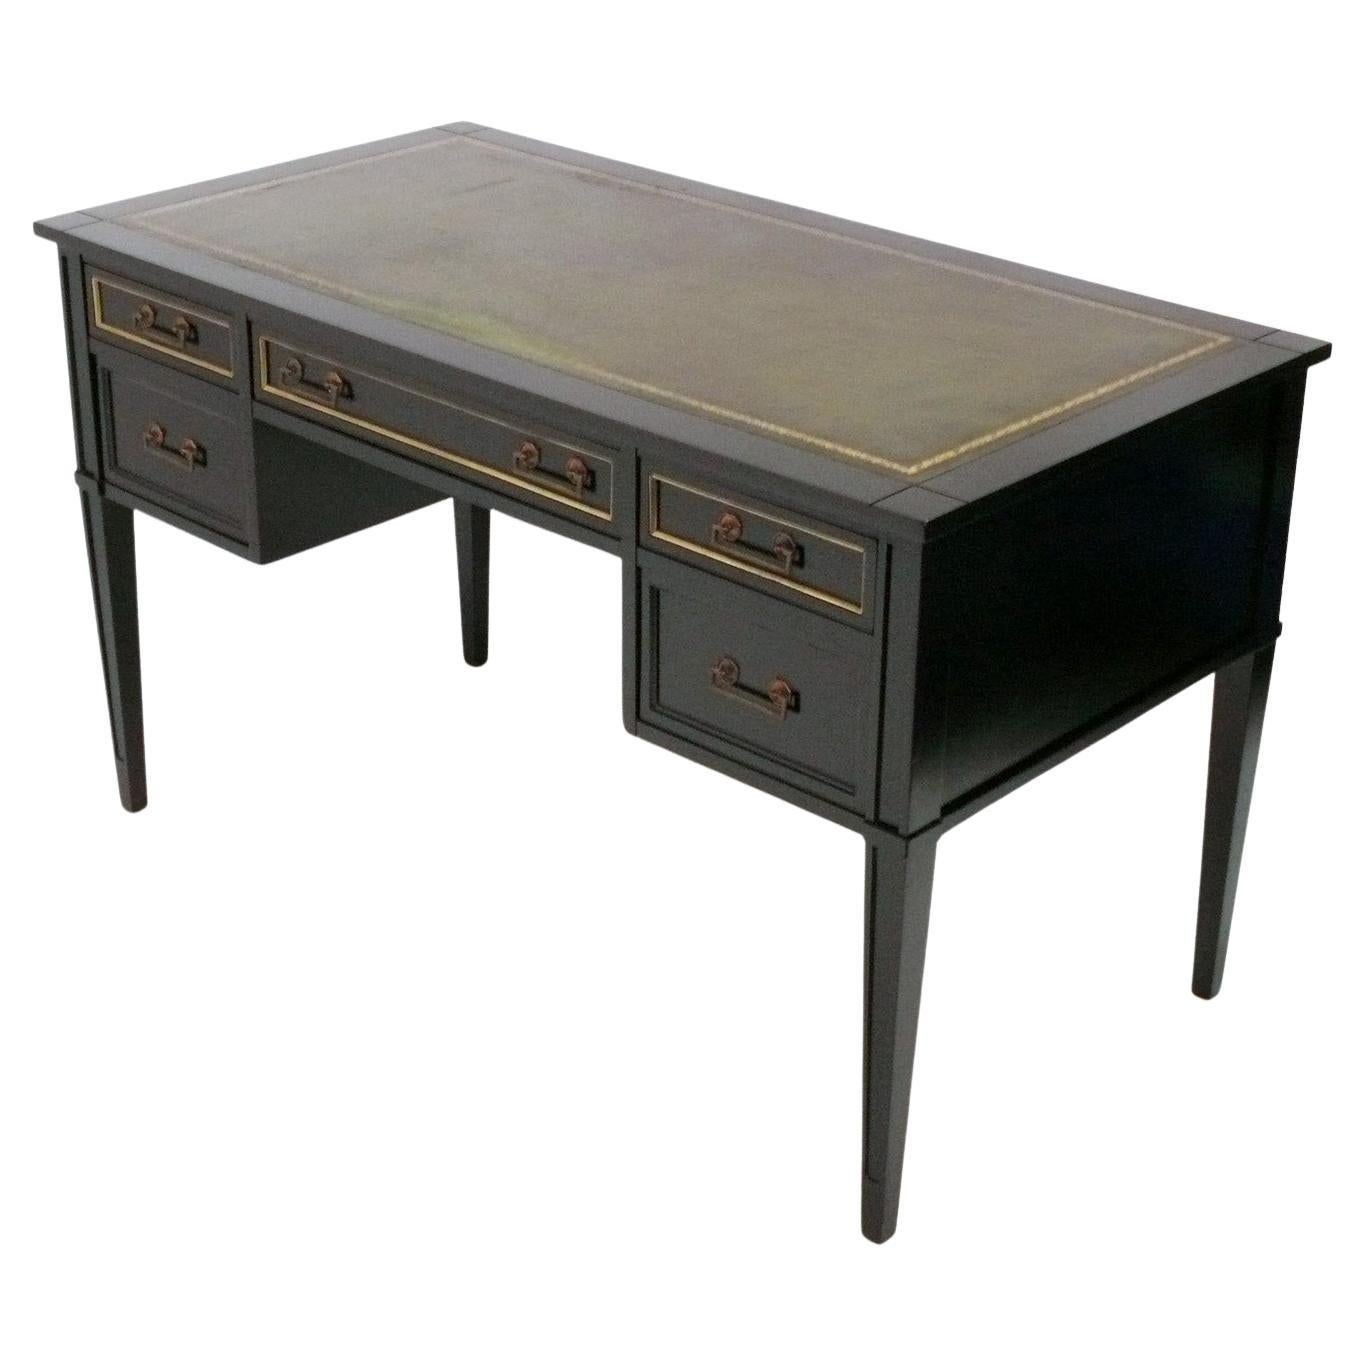 Black Lacquer Desk or Bureau Plat with Inset Green Leather Top - Refinished For Sale